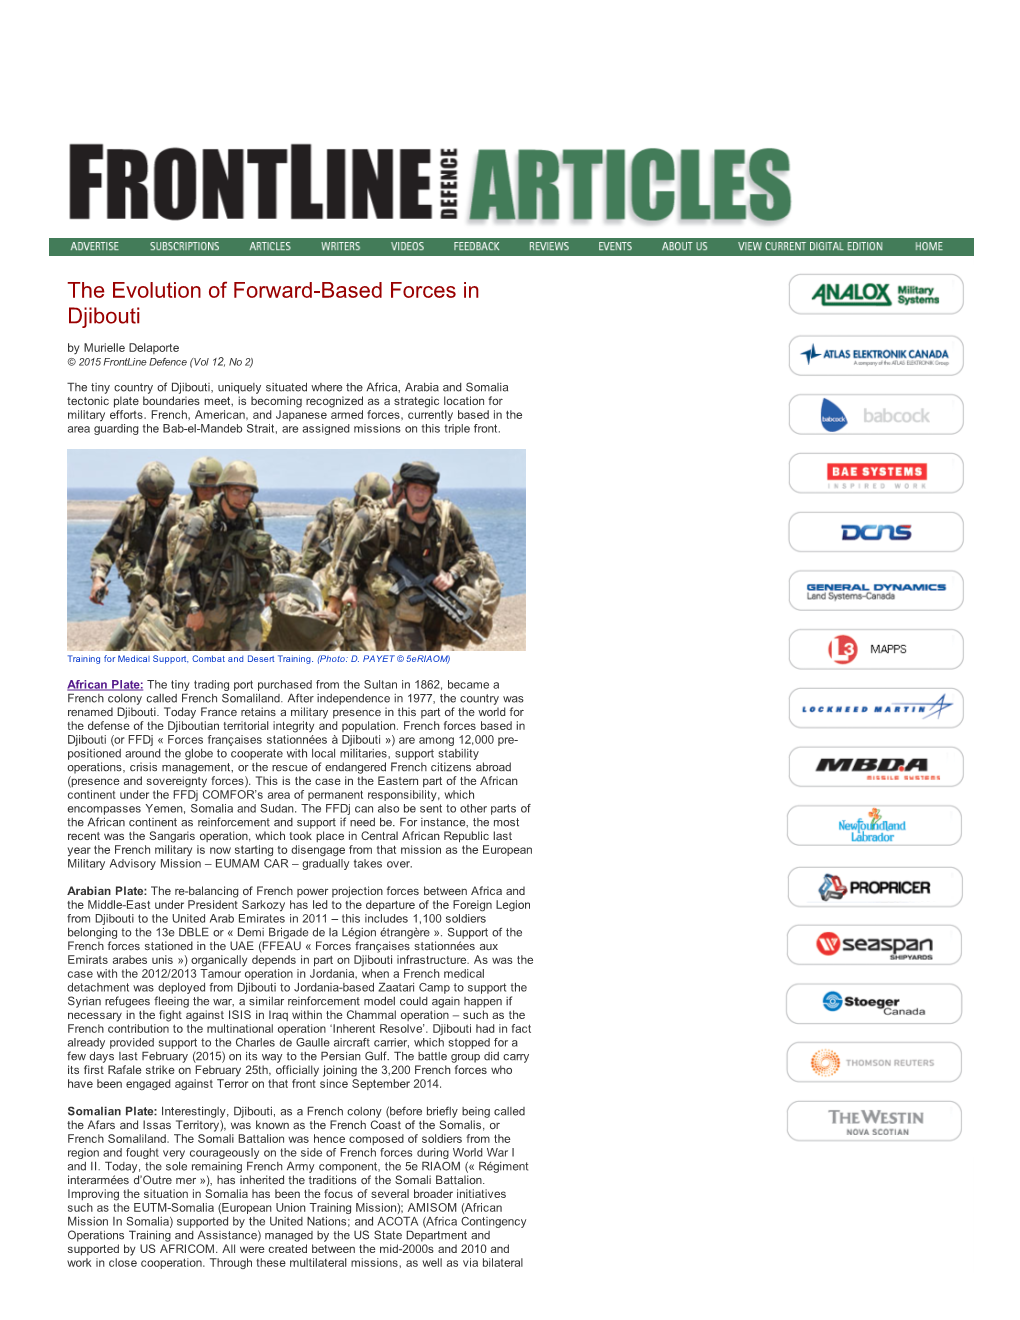 The Evolution of Forwardbased Forces in Djibouti